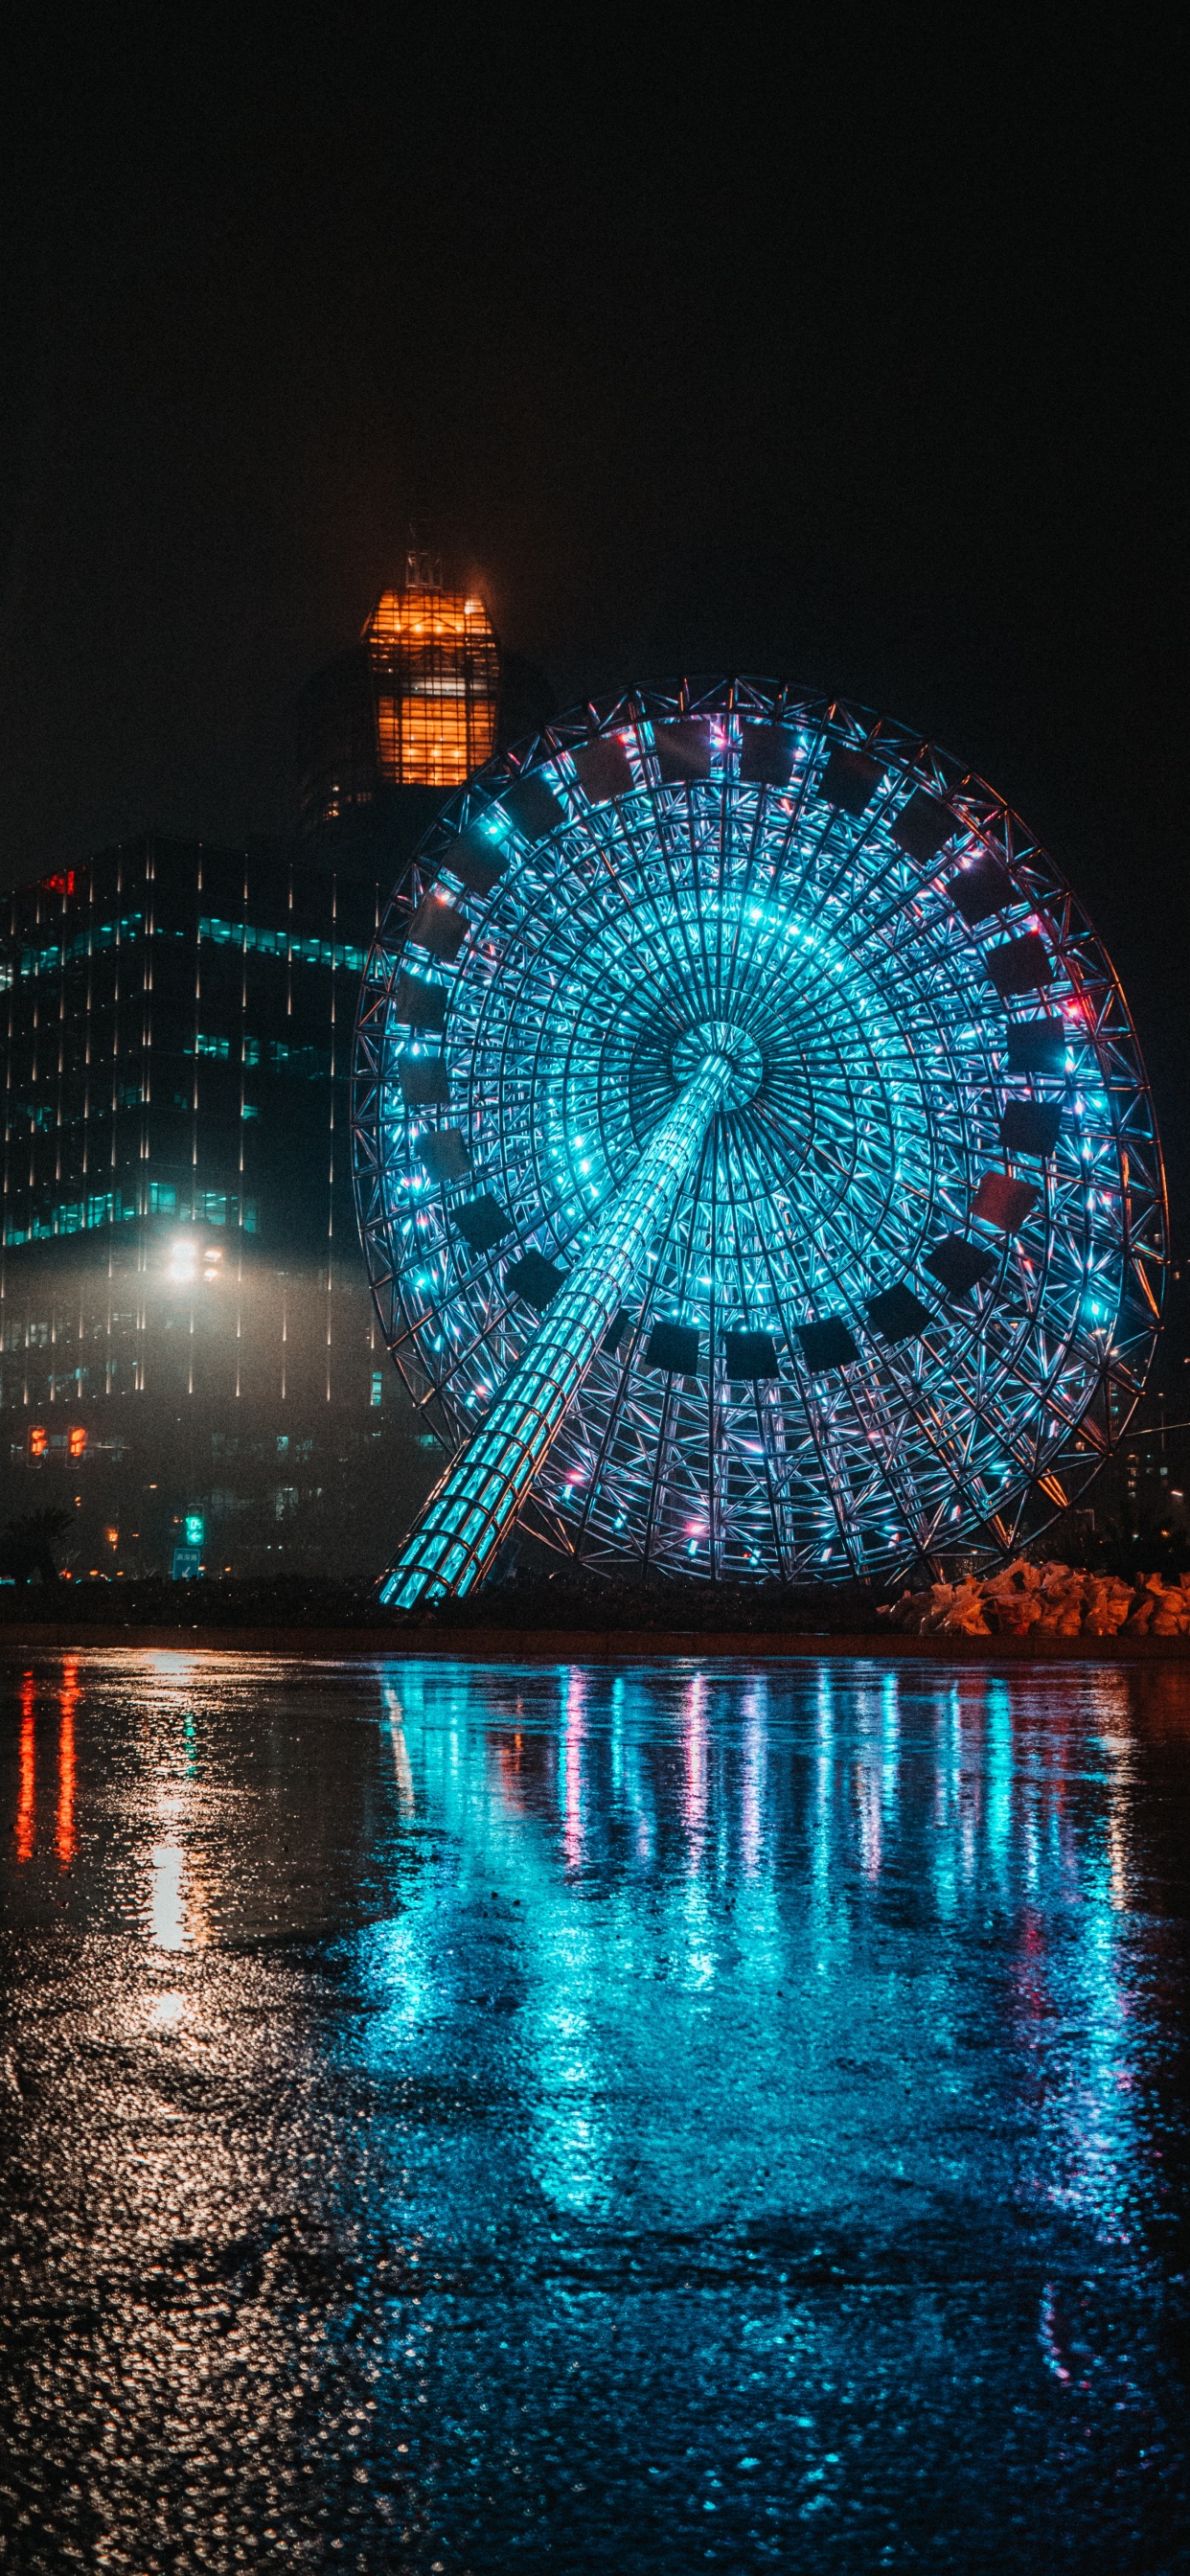 Blue and White Ferris Wheel During Night Time. Wallpaper in 1242x2688 Resolution